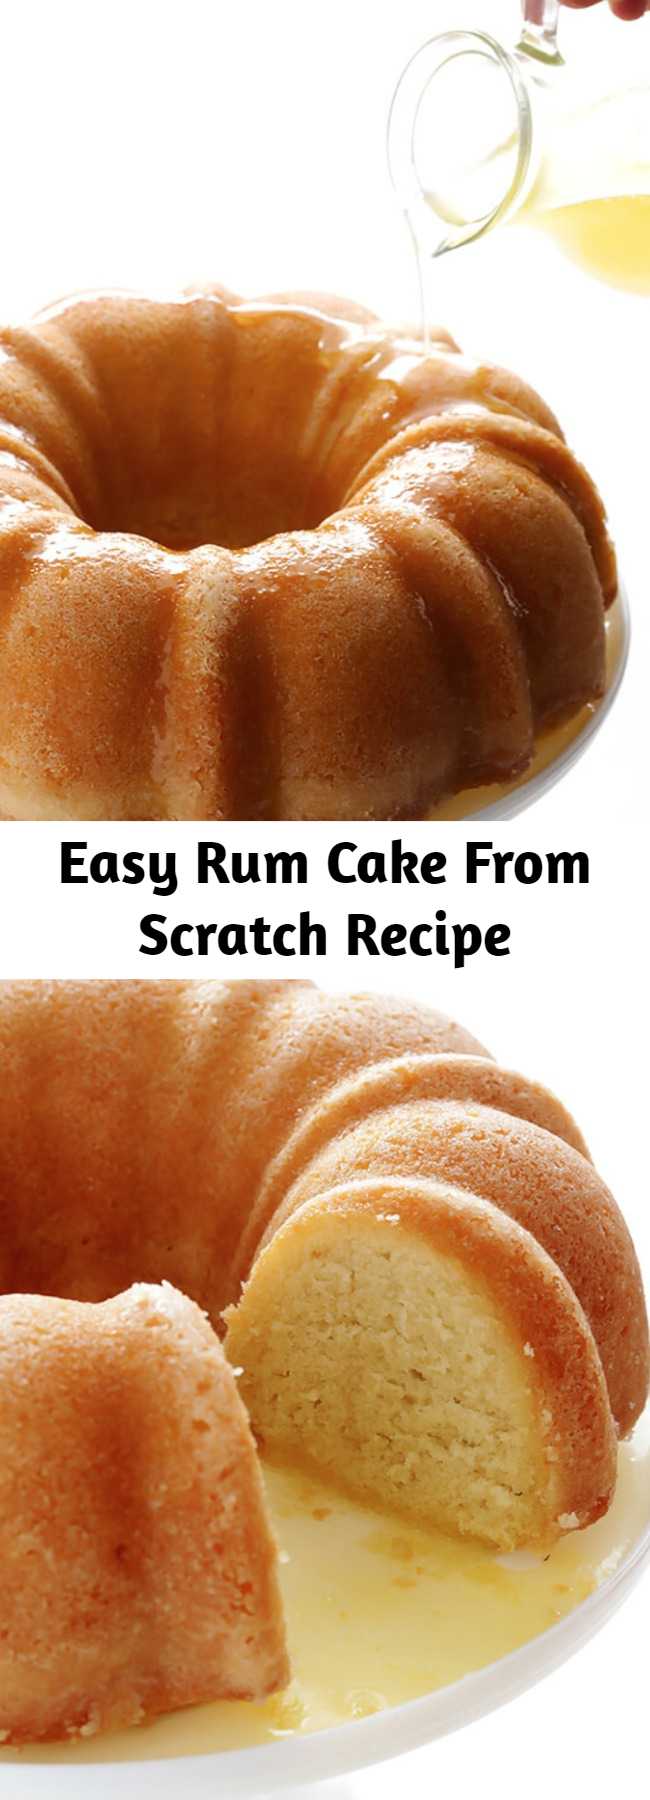 Easy Rum Cake From Scratch Recipe - This rum cake recipe is made from scratch, with rum baked into a delicious yellow bundt cake and drizzled with a butter-rum sauce.